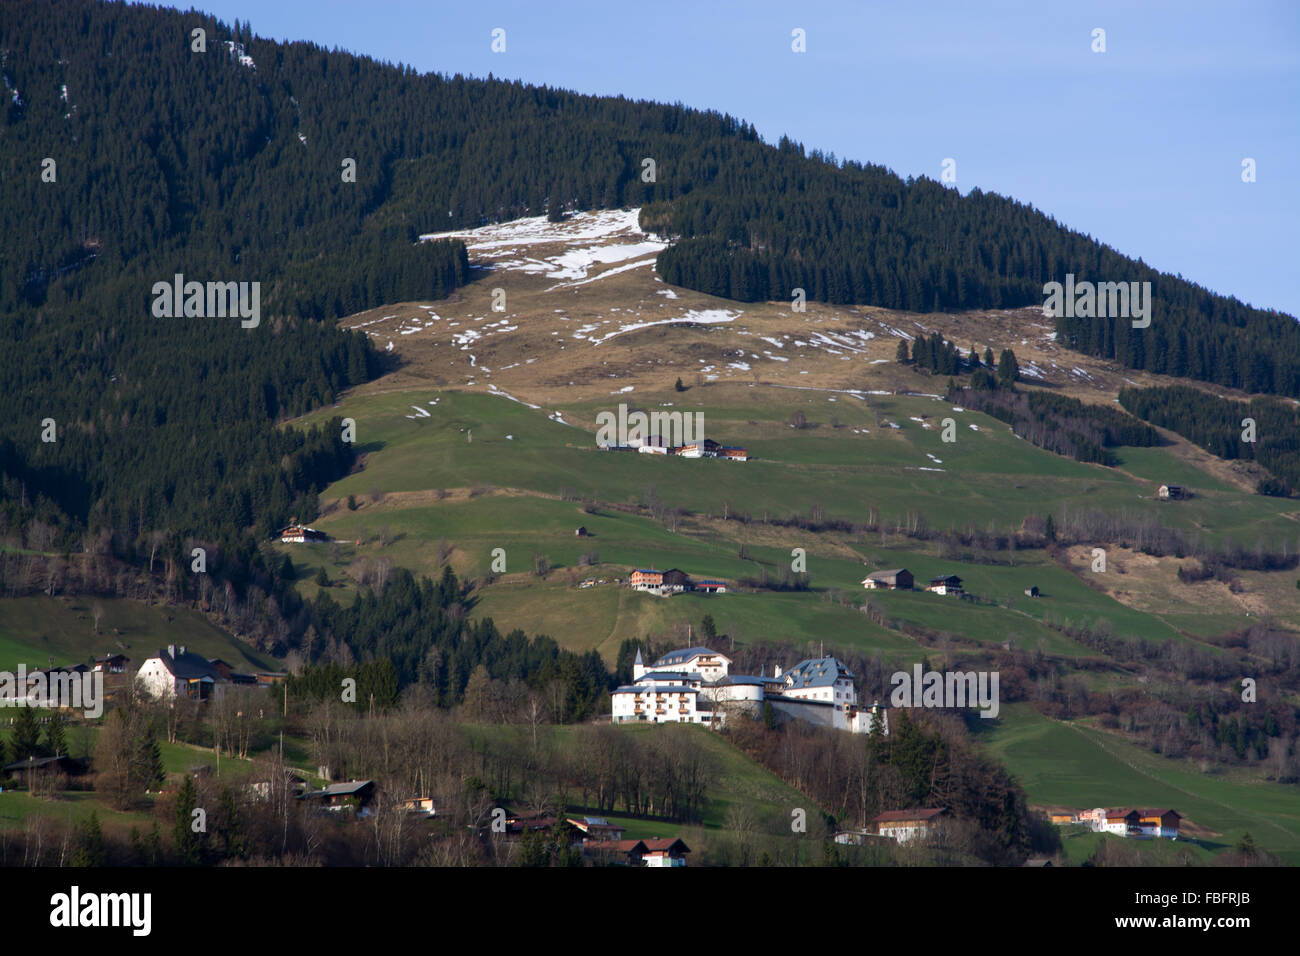 Mittersill Palace, located in the Pinzgau district, Austria, photo taken in spring time. Stock Photo